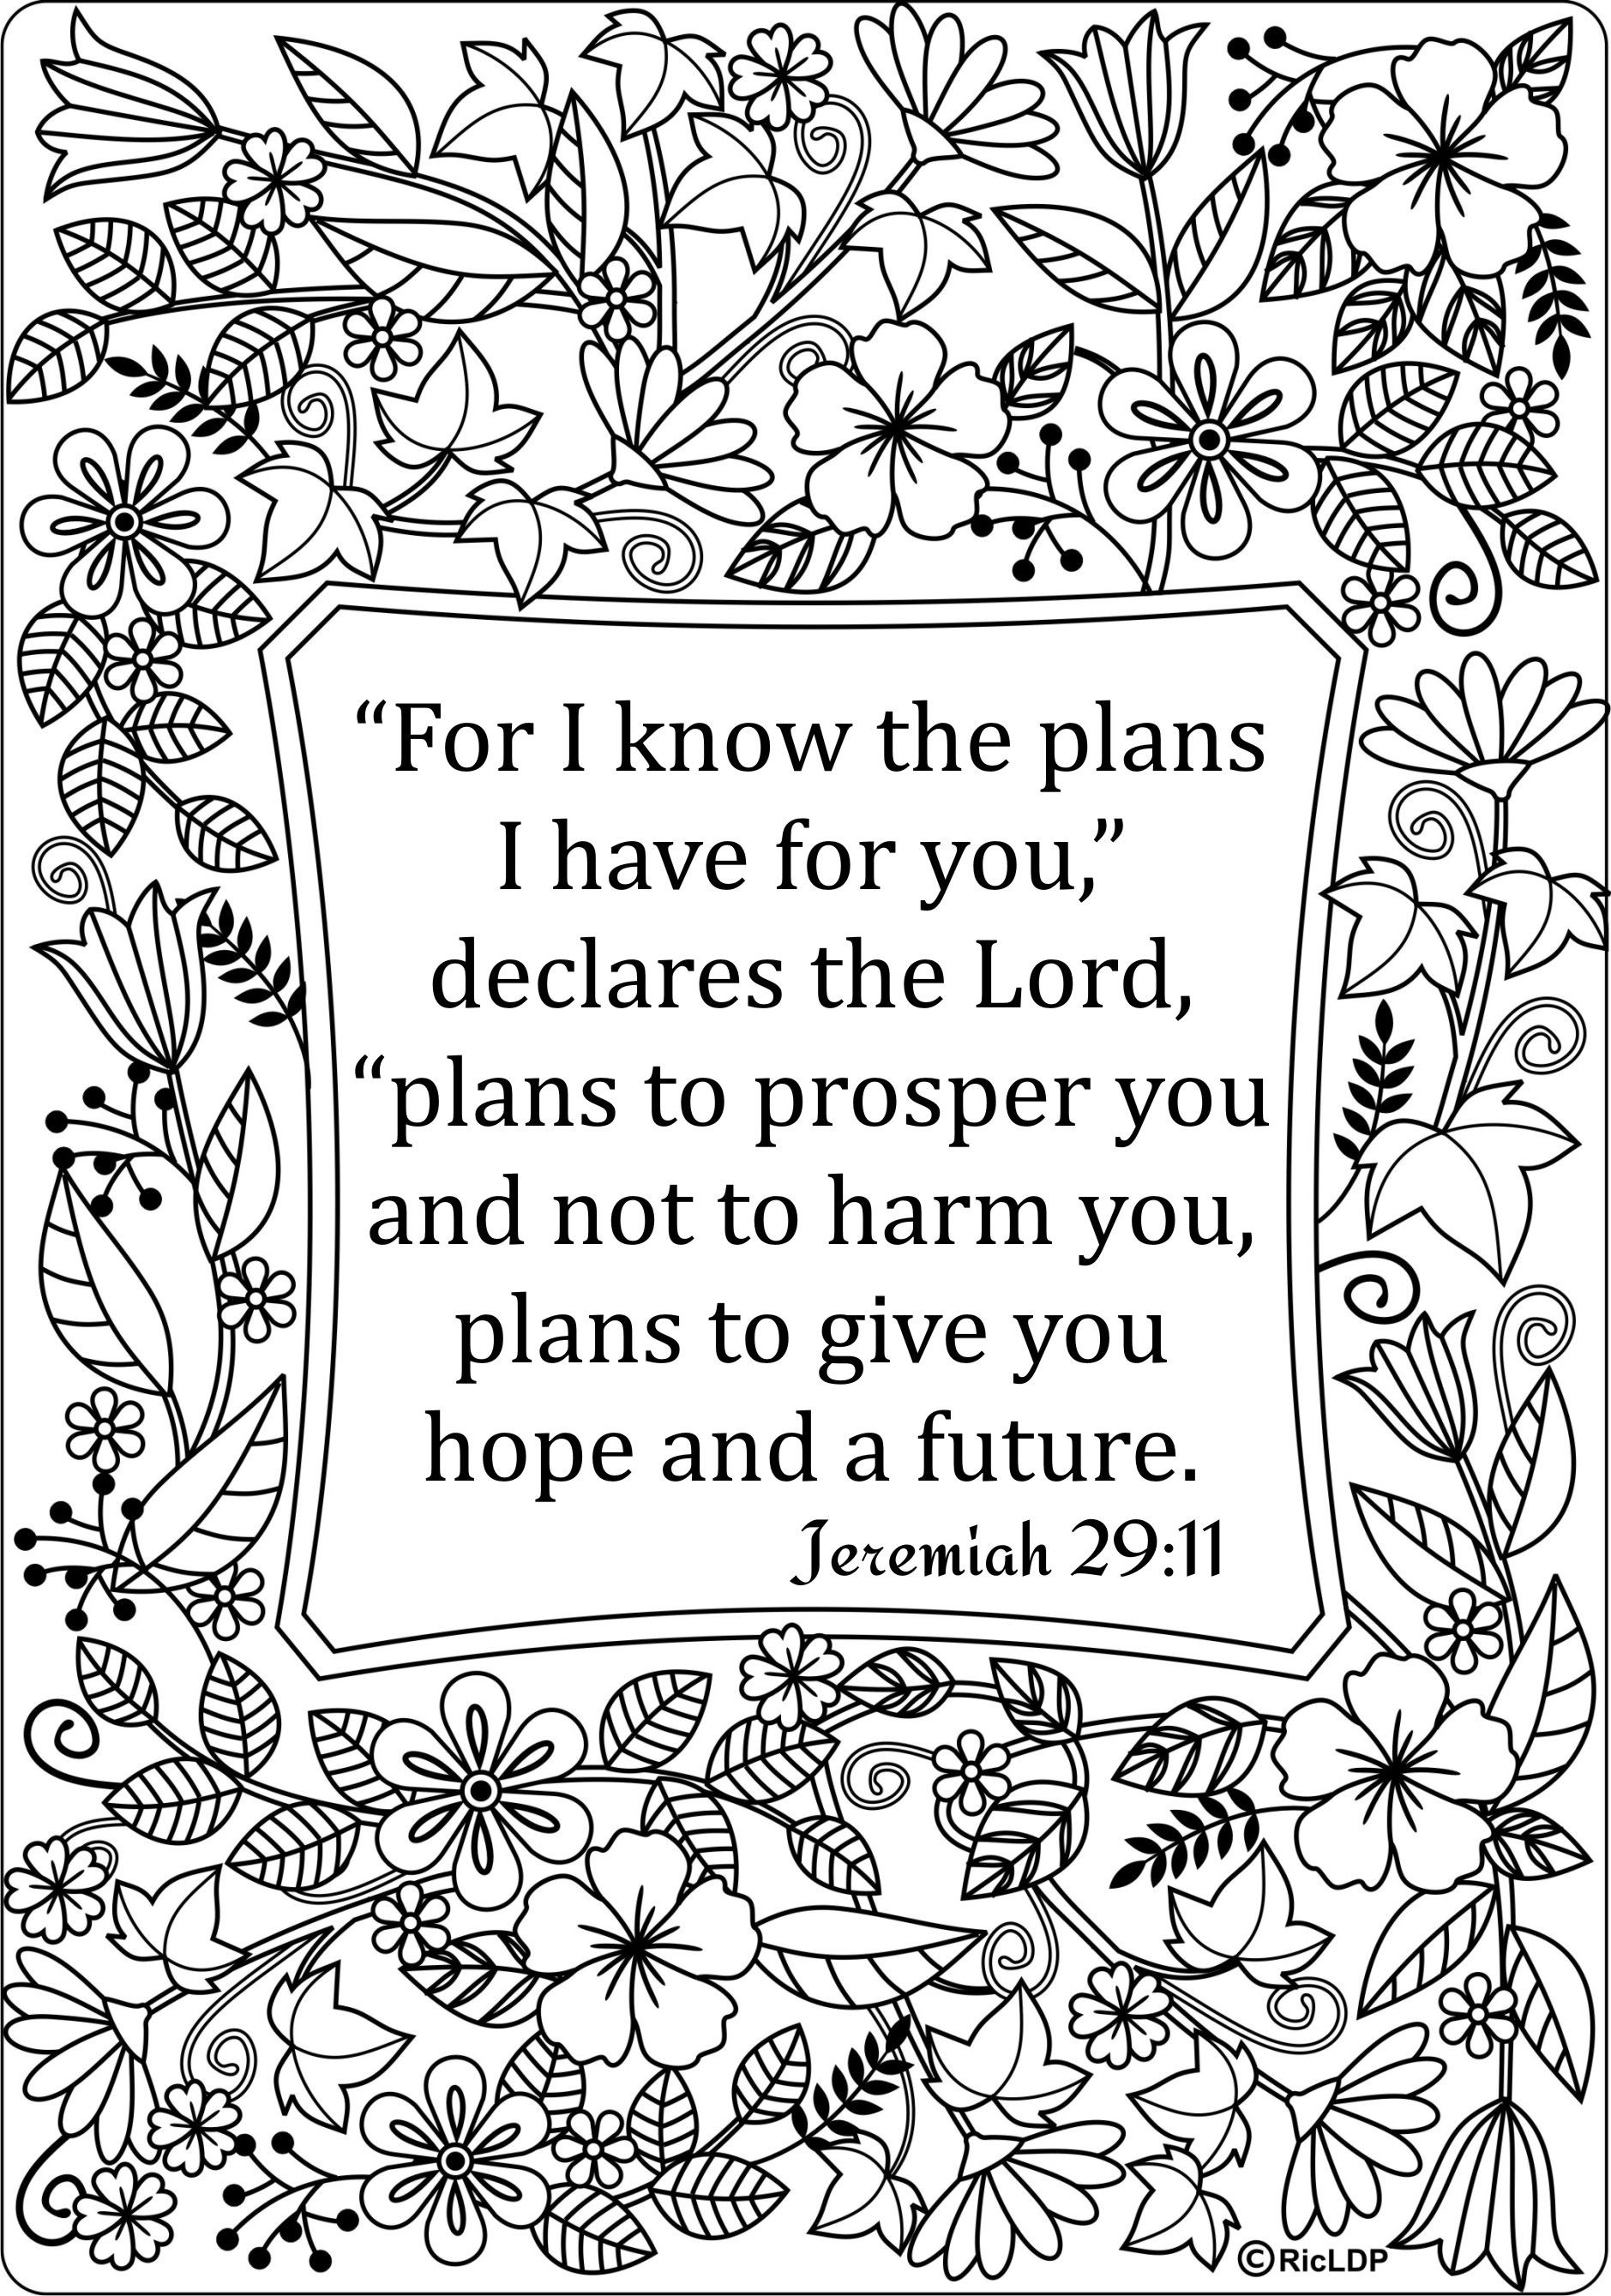 15 Bible Verses Coloring Pages | Coloring Pages | Bible Verse - Free Printable Bible Coloring Pages With Verses